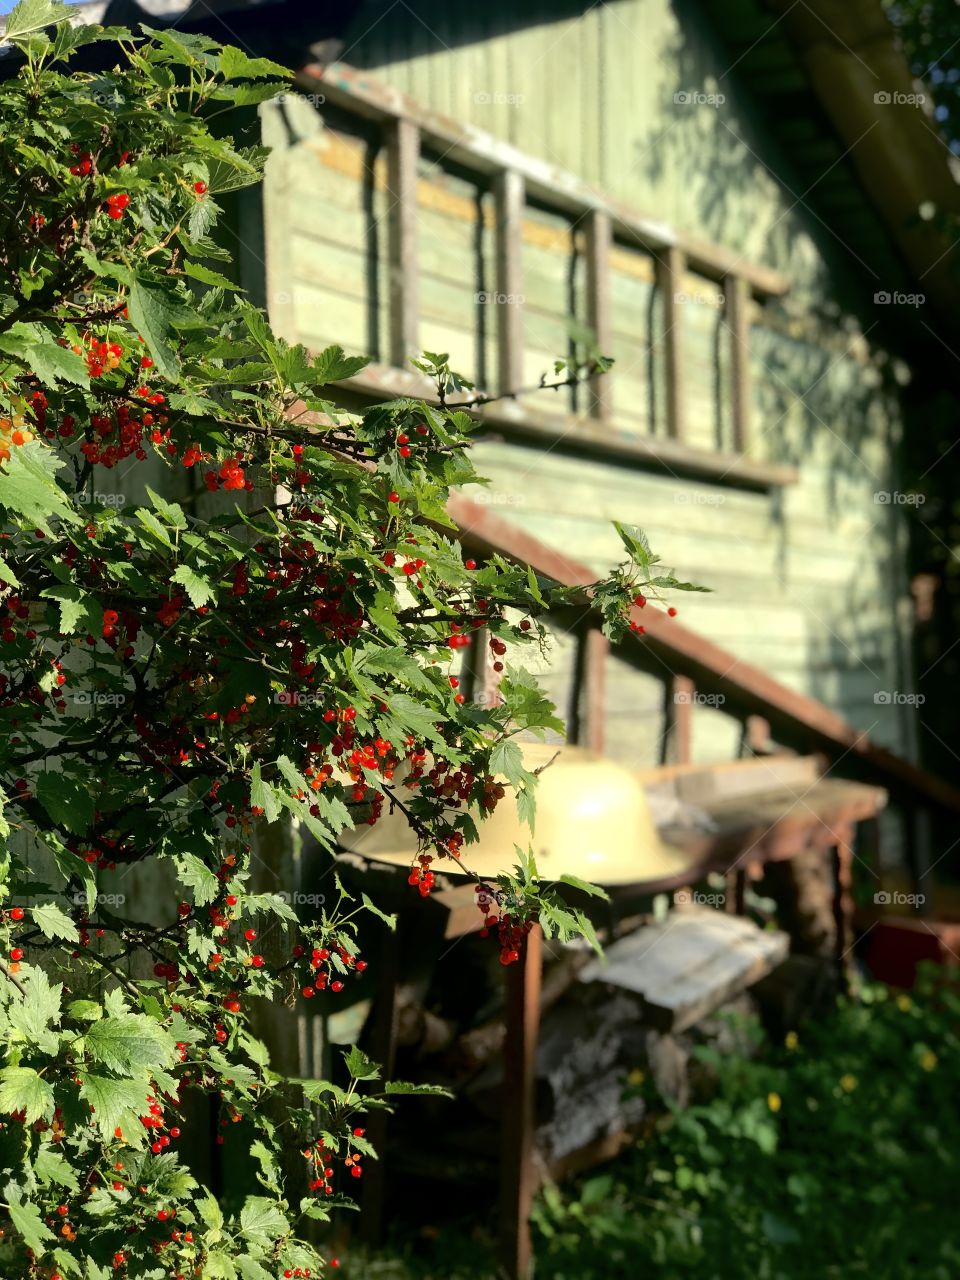 Red currant Bush. Old barn. Red currant. Berries